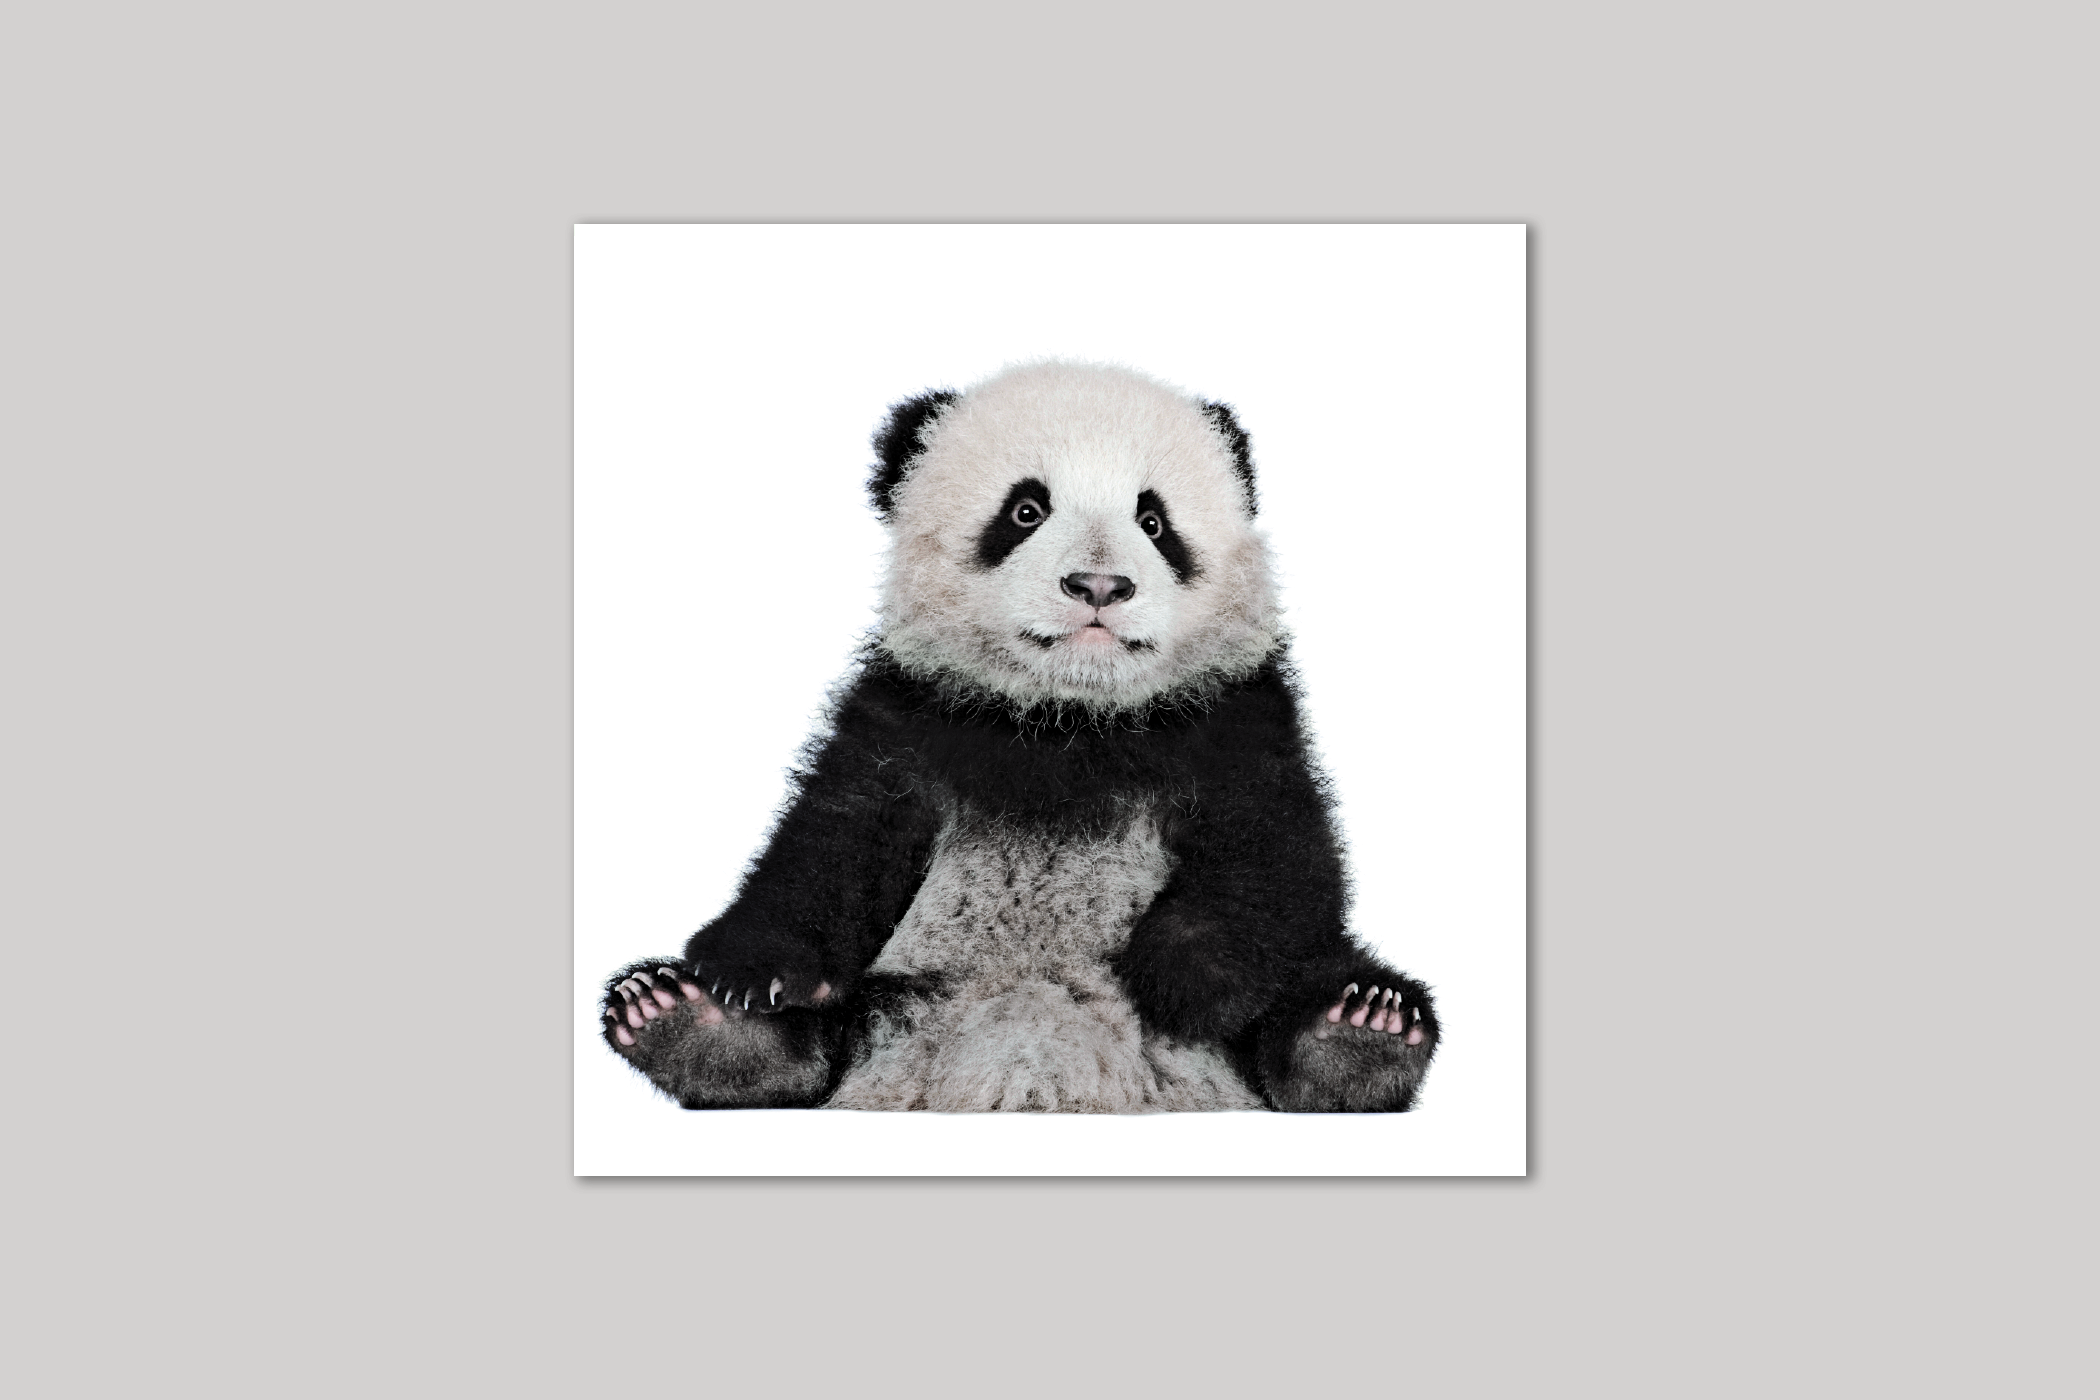 Albert the Panda Cub from Exposure range of photographic cards by Icon.